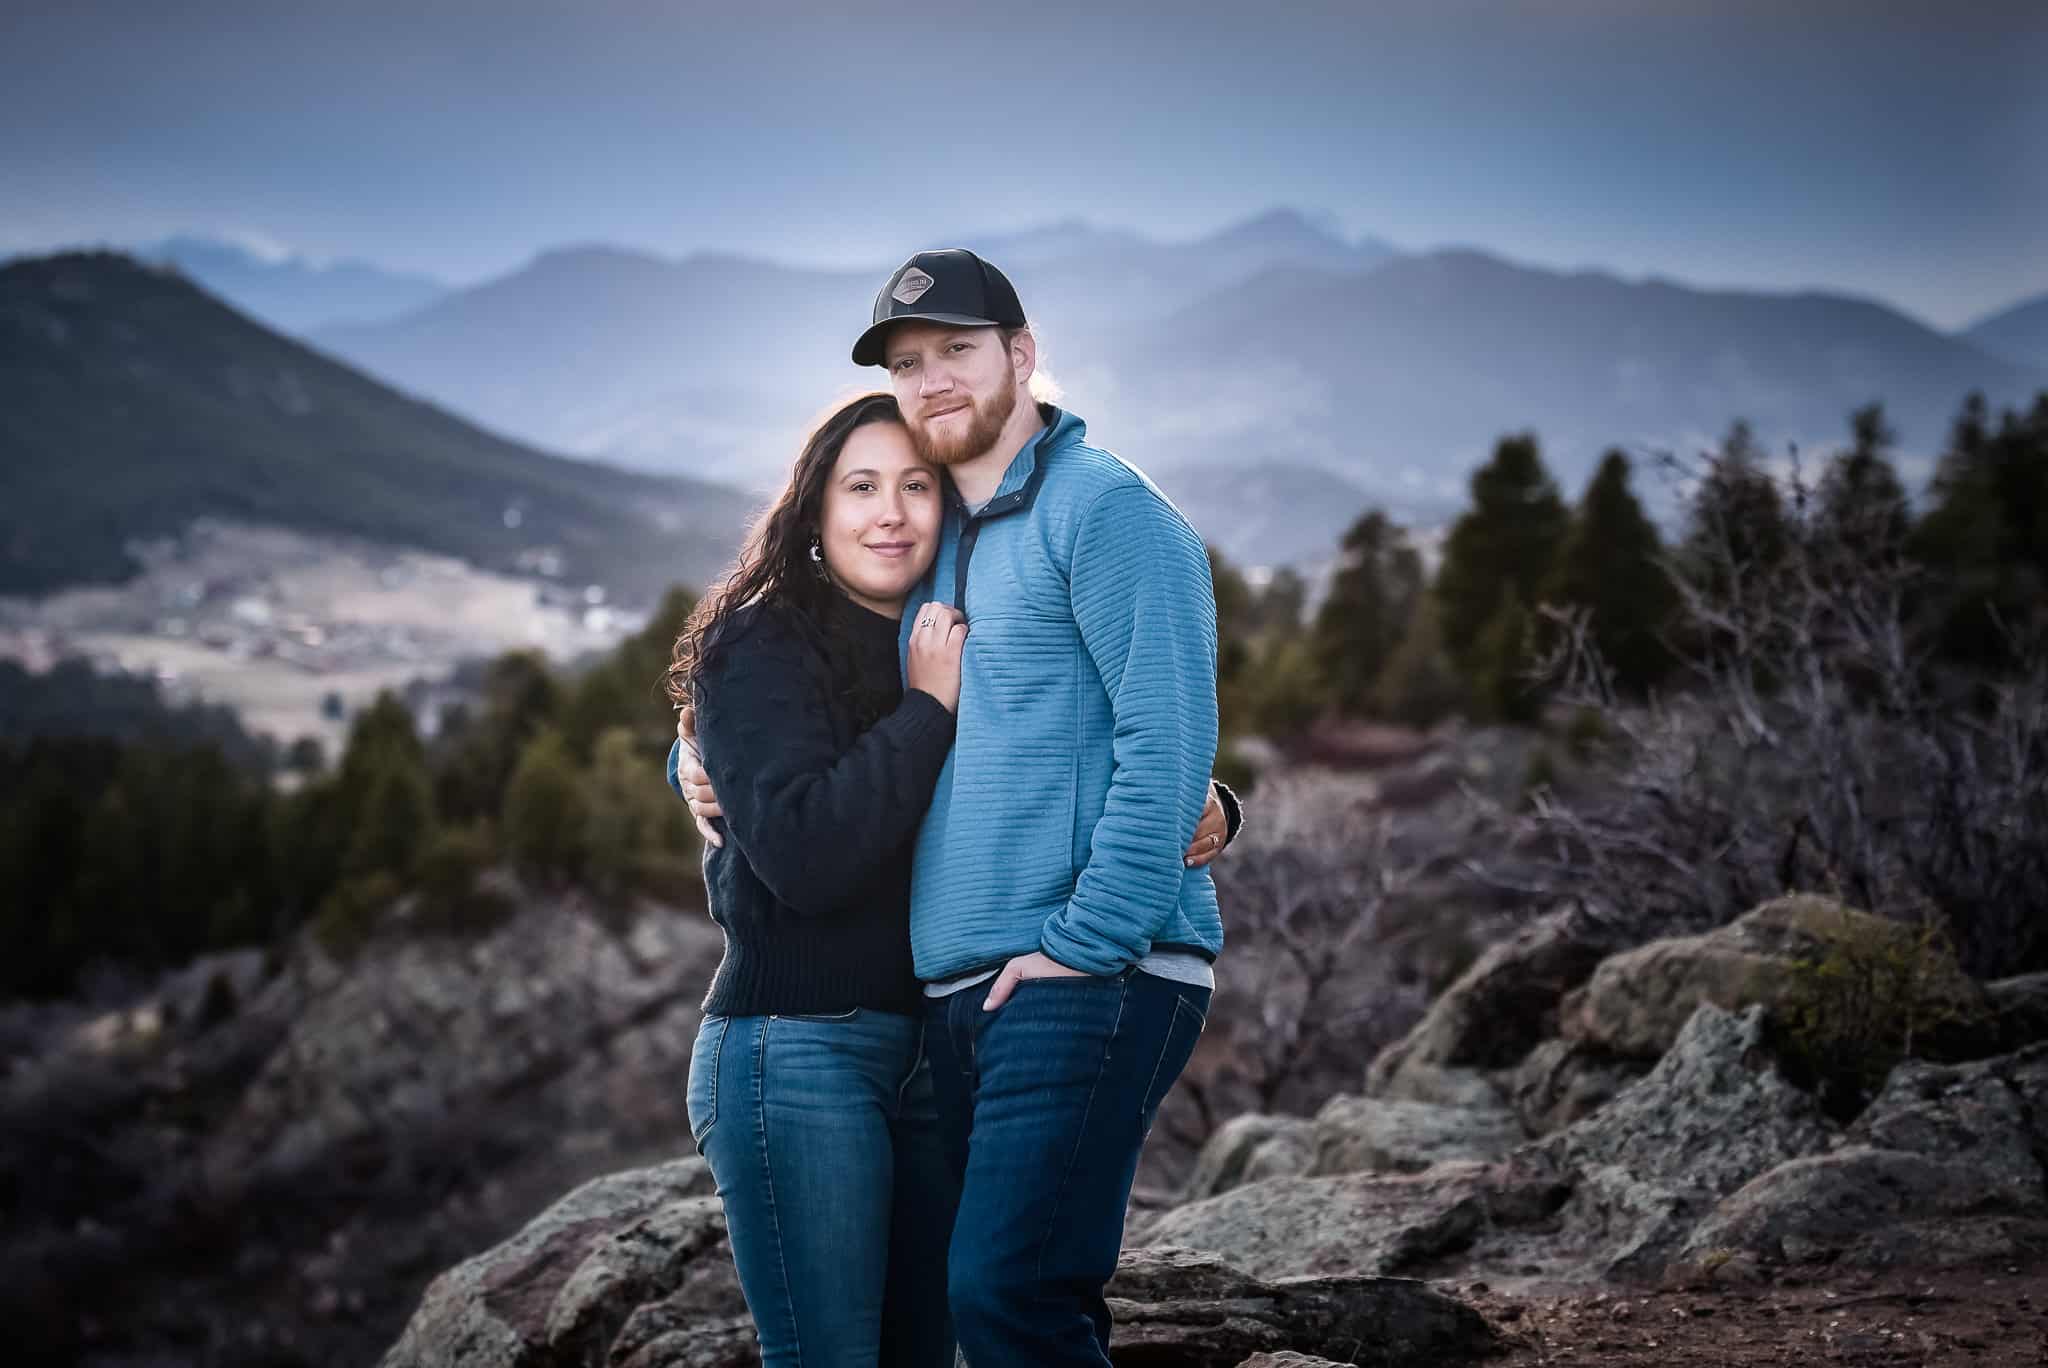 The best engagement photos on Mount Falcon take place at dusk in the spring after the sun goes down during the so-called blue hour.